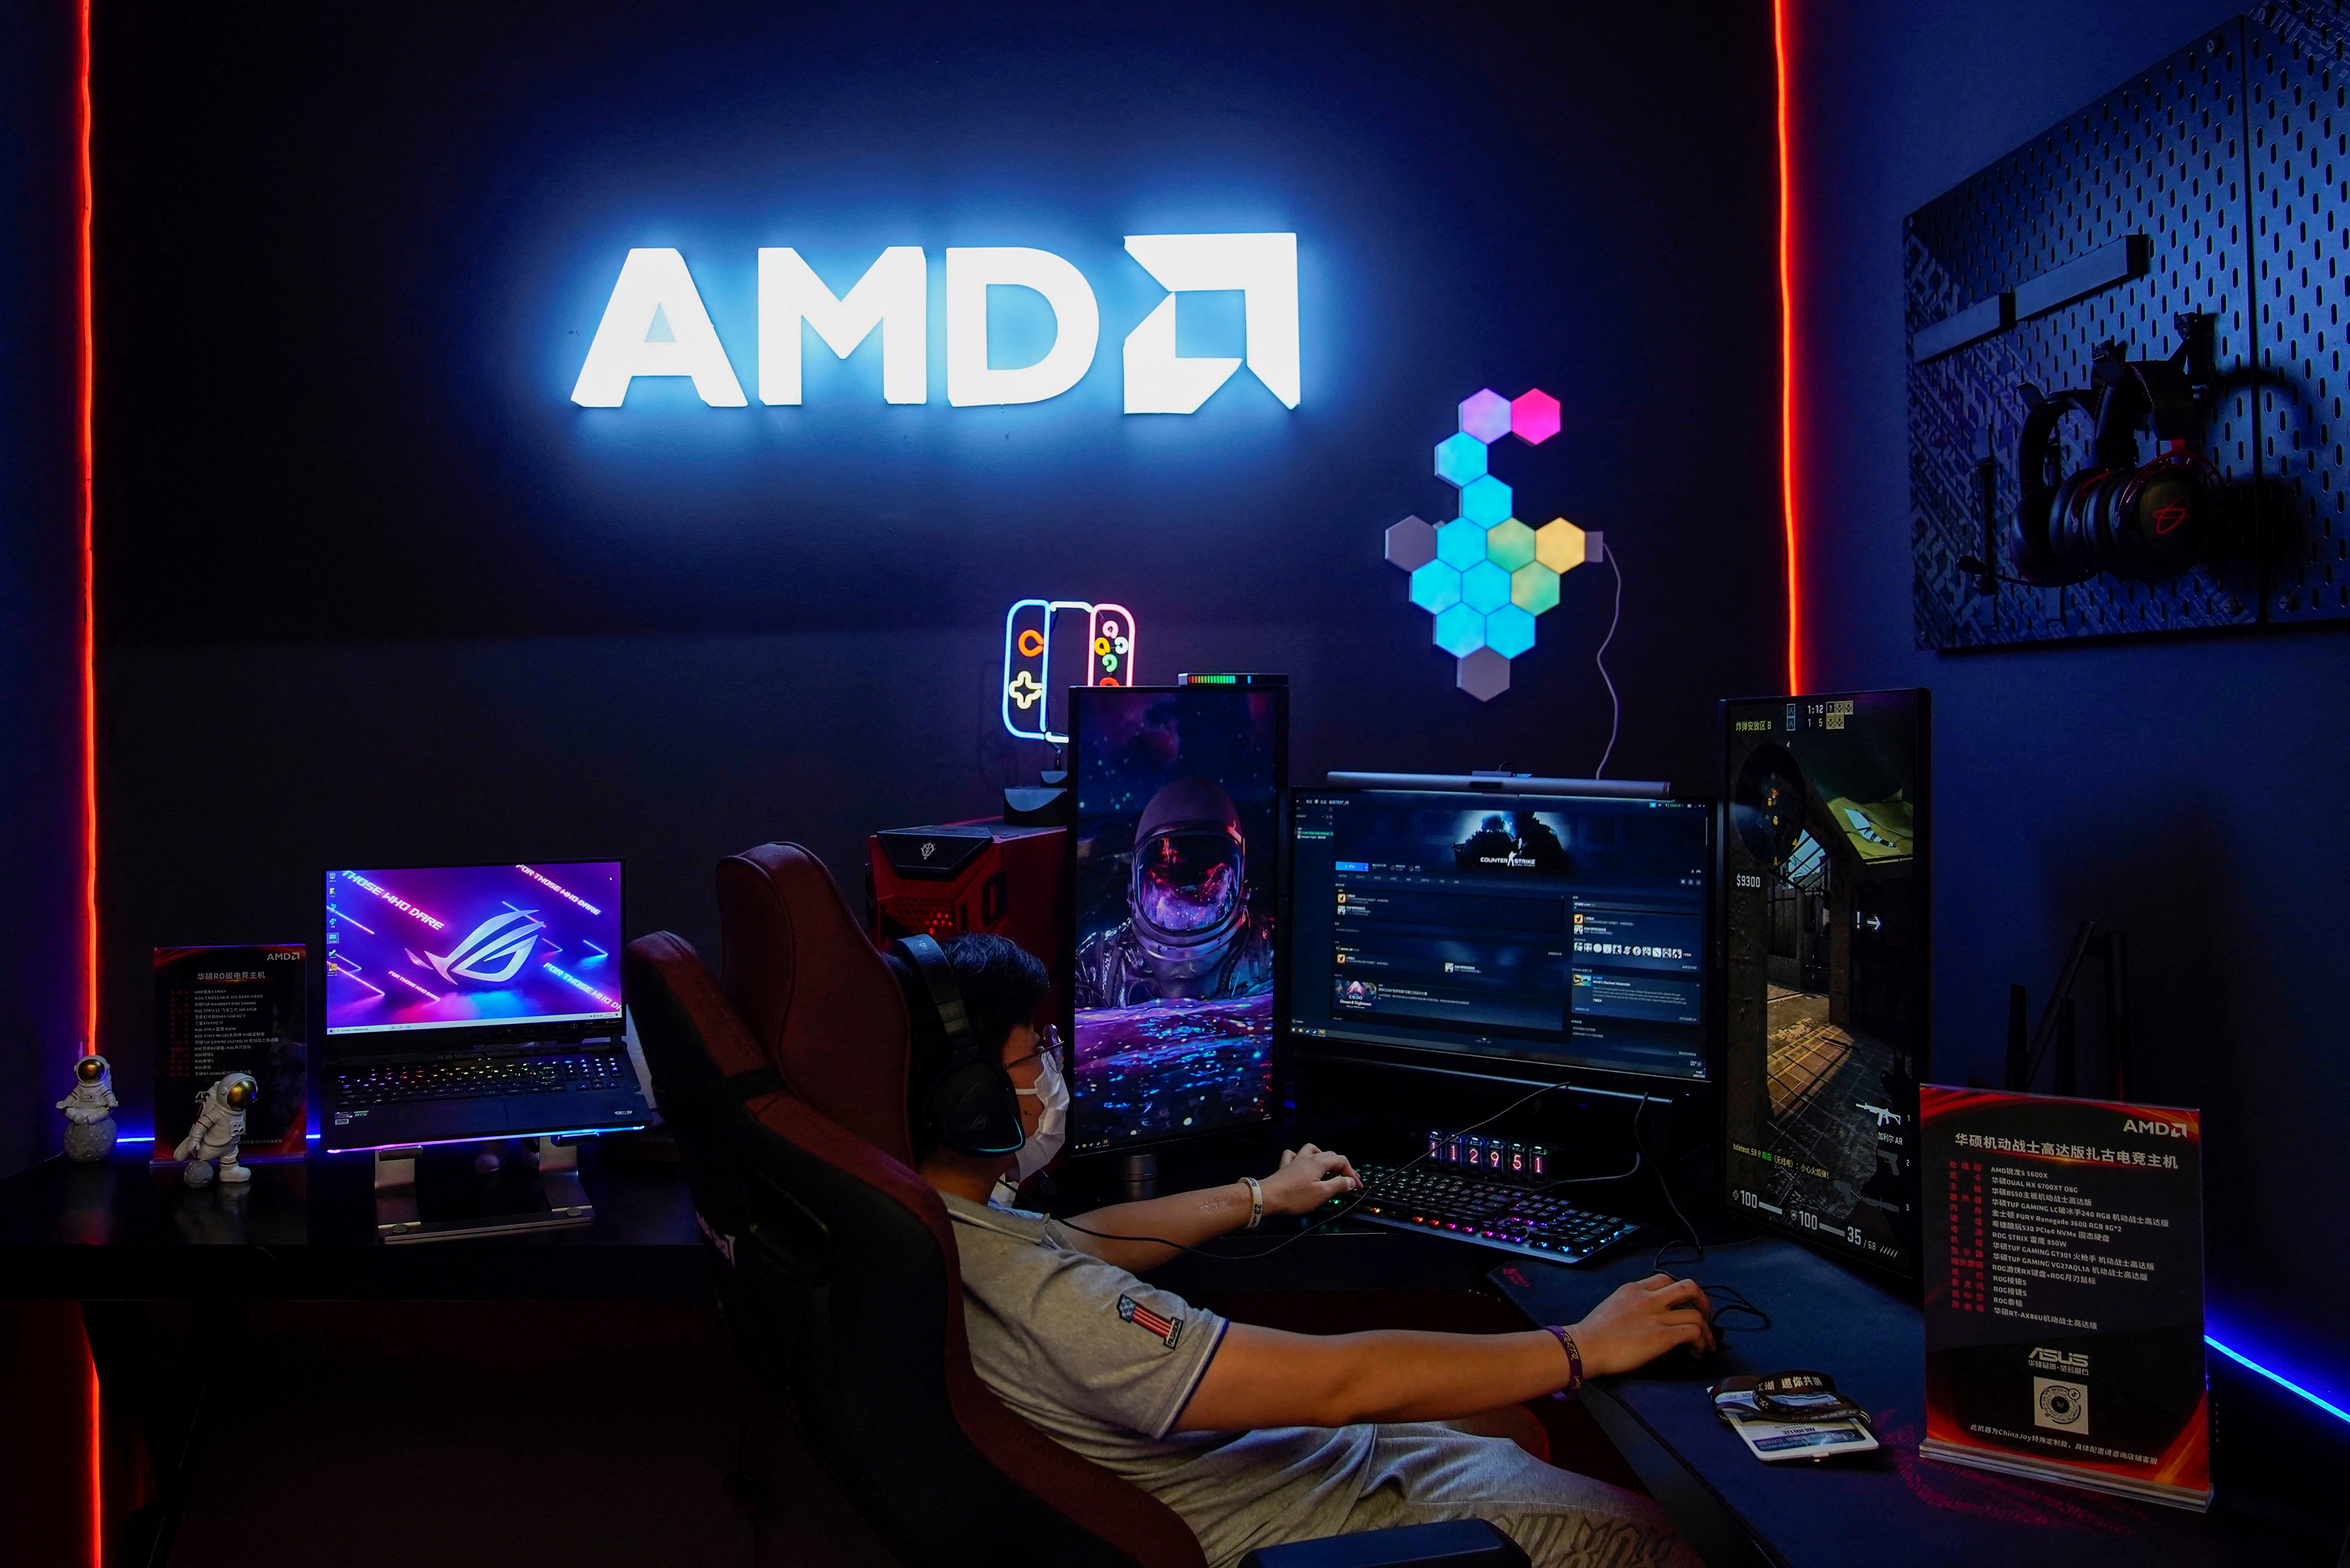 A sign of AMD is seen at the China Digital Entertainment Expo and Conference, also known as ChinaJoy, in Shanghai